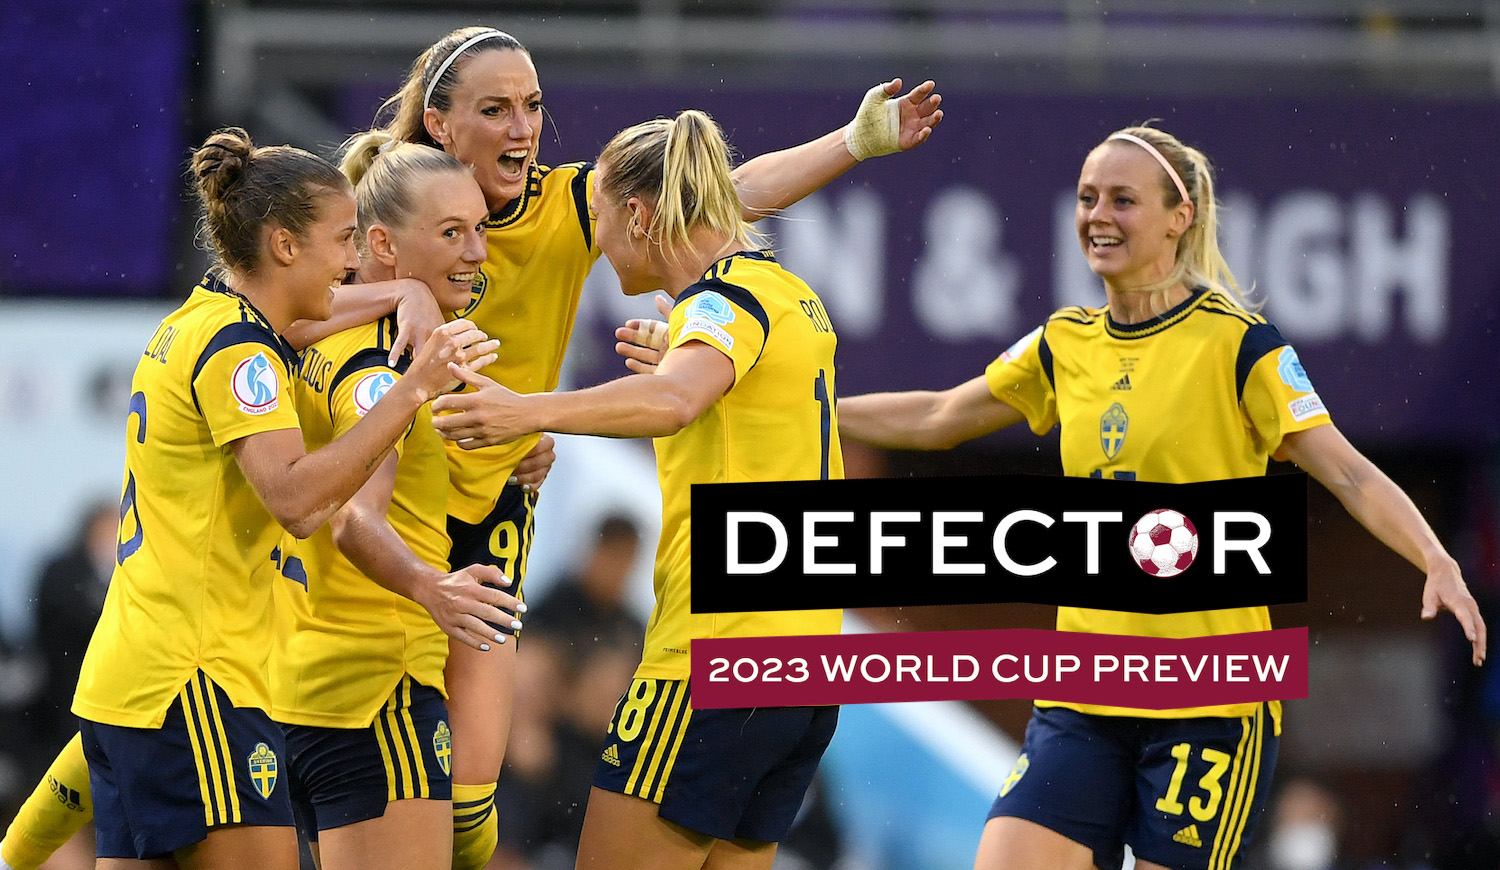 LEIGH, ENGLAND - JULY 22: Stina Blackstenius of Sweden celebrates with teammates after scoring a goal which was later disallowed by VAR for an offside during the UEFA Women's Euro 2022 Quarter Final match between Sweden and Belgium at Leigh Sports Village on July 22, 2022 in Leigh, England. (Photo by Harriet Lander/Getty Images)